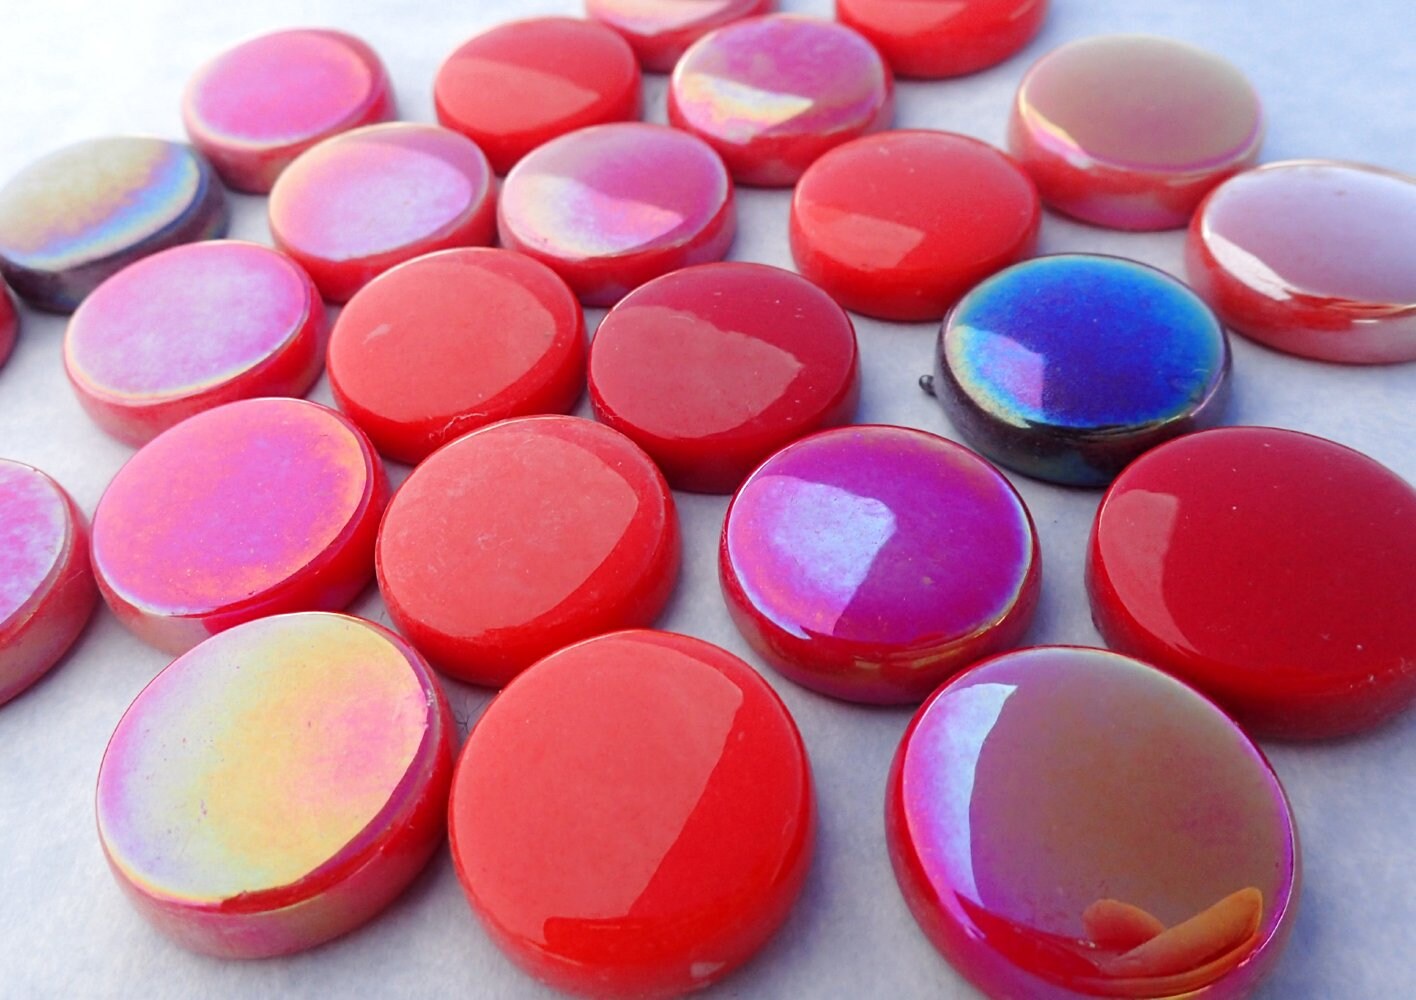 Red Mix Glass Drops Mosaic Tiles - 100 grams - 20mm - Mix of Gloss and Iridescent Glass Gems - Approx 20 Tiles